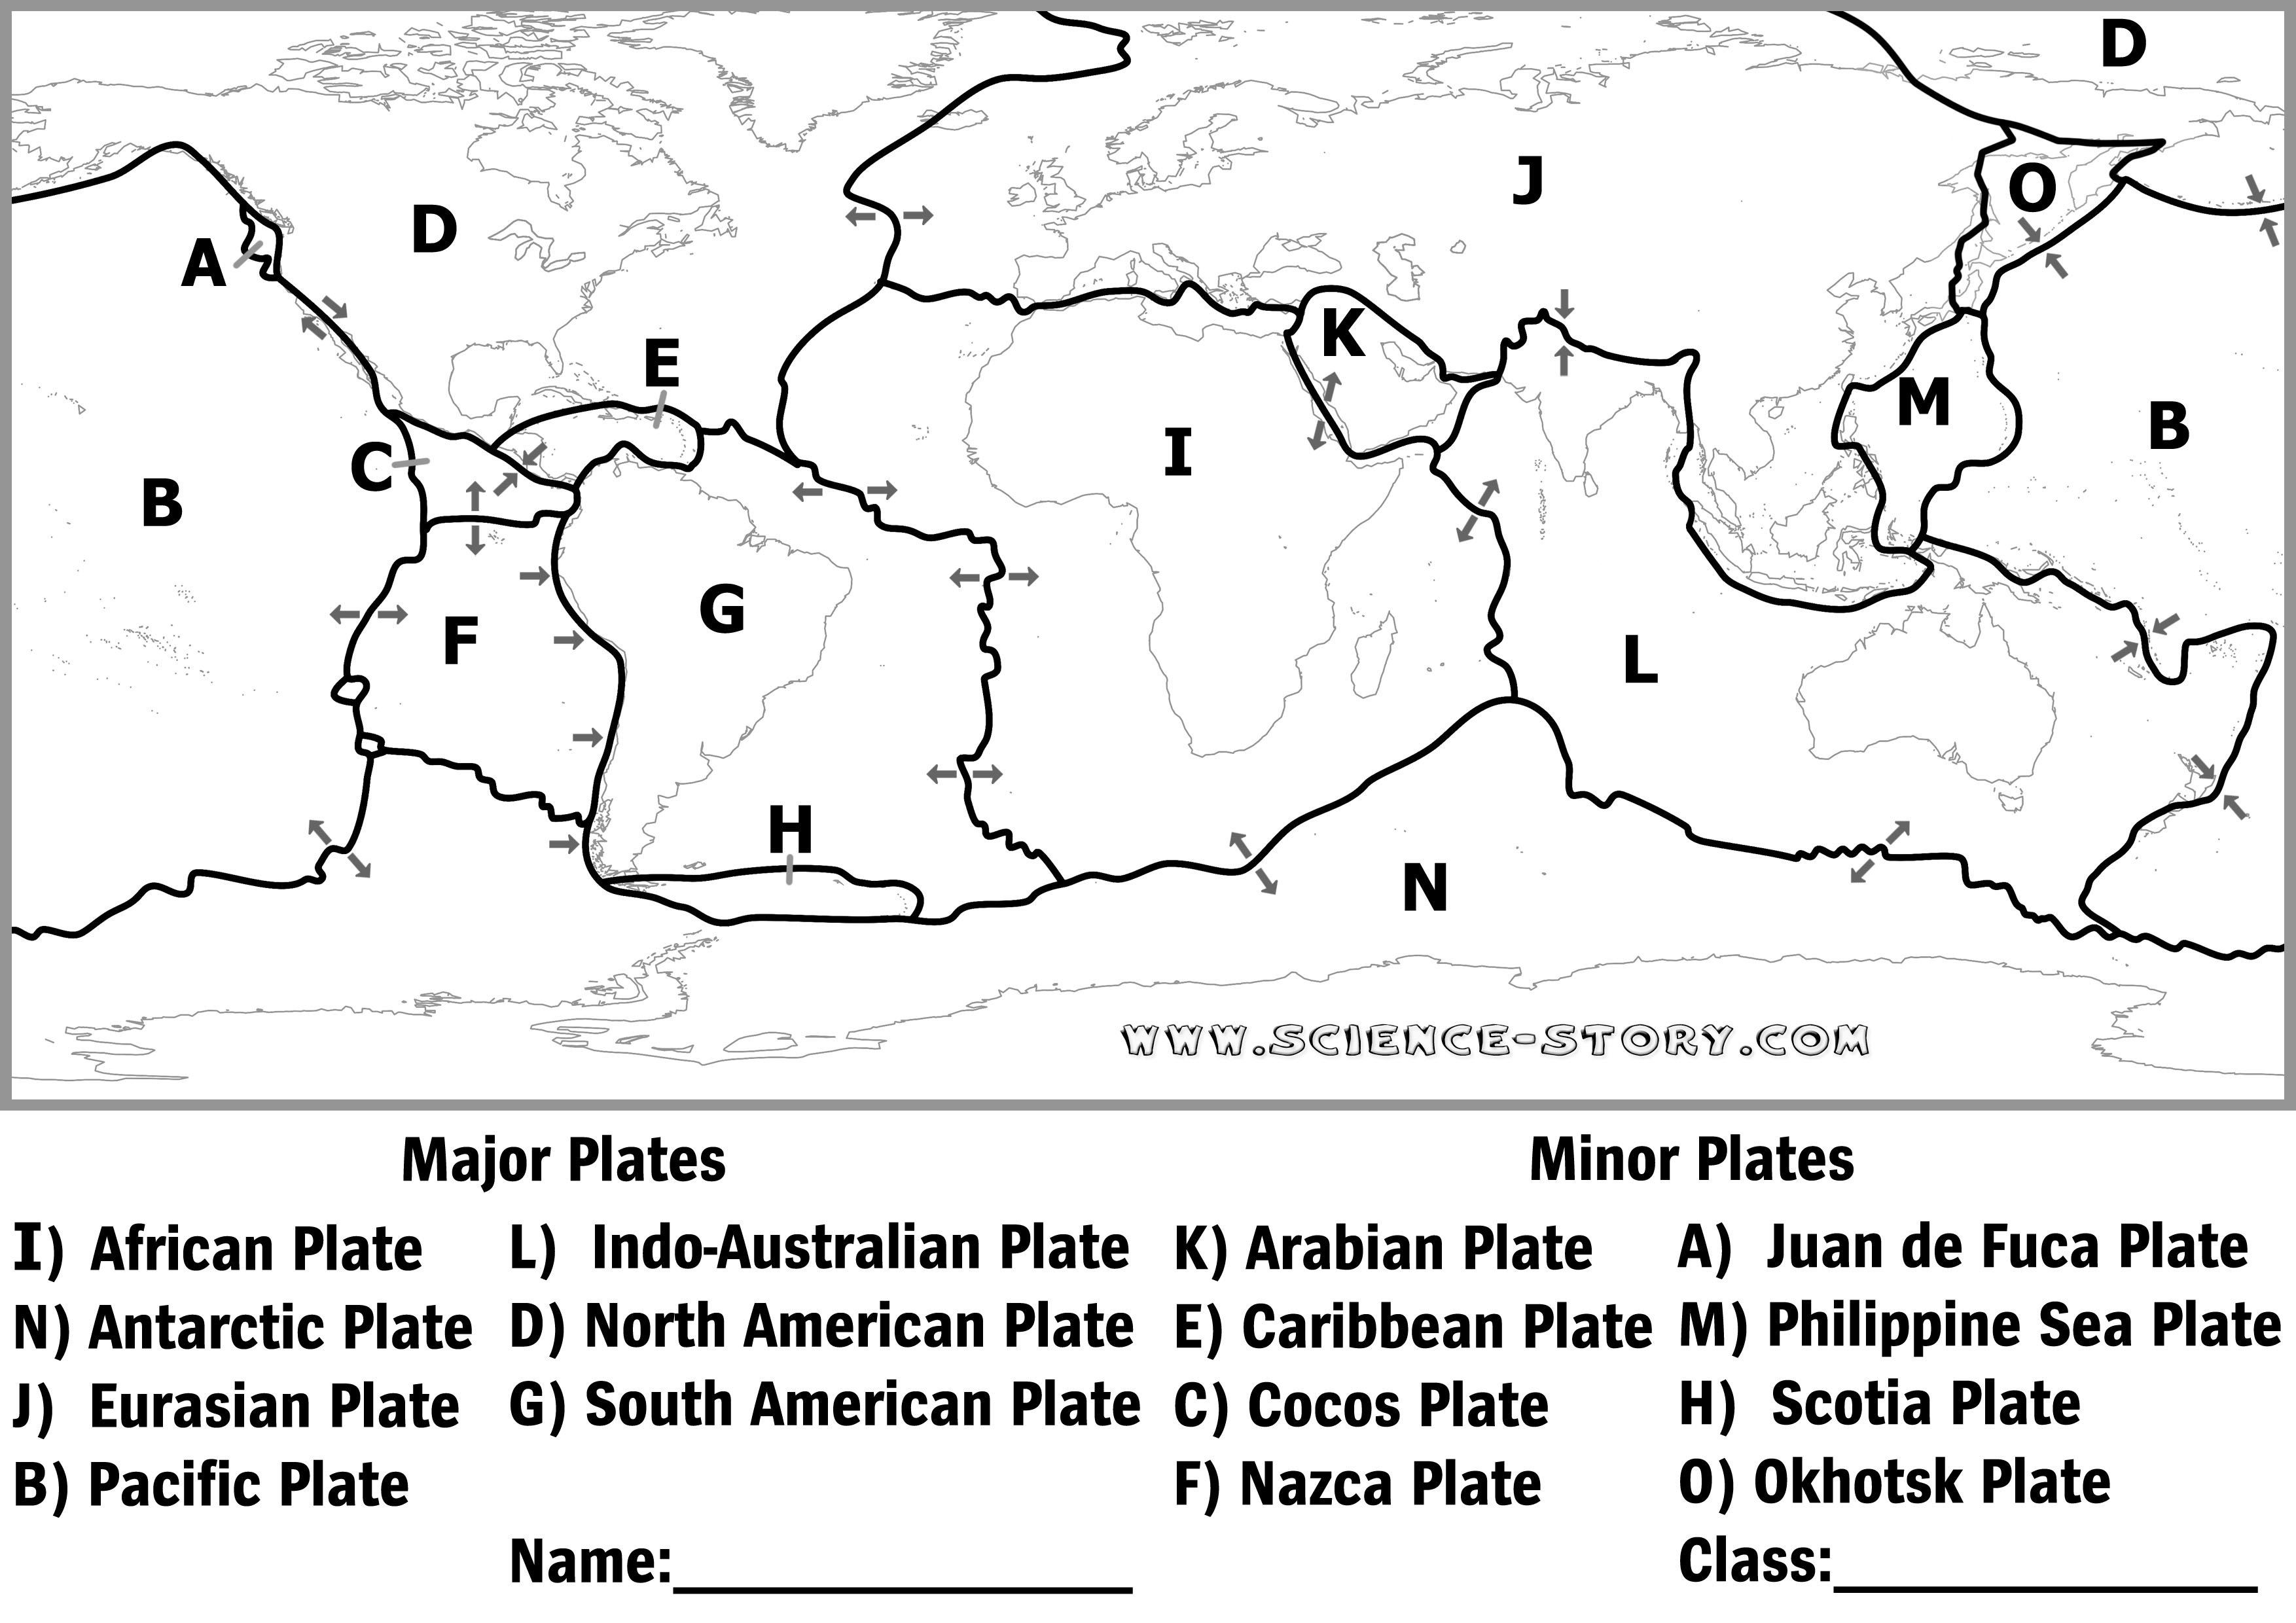 Science Story Resources And Links Pertaining To Plate Tectonics Pdf Worksheet